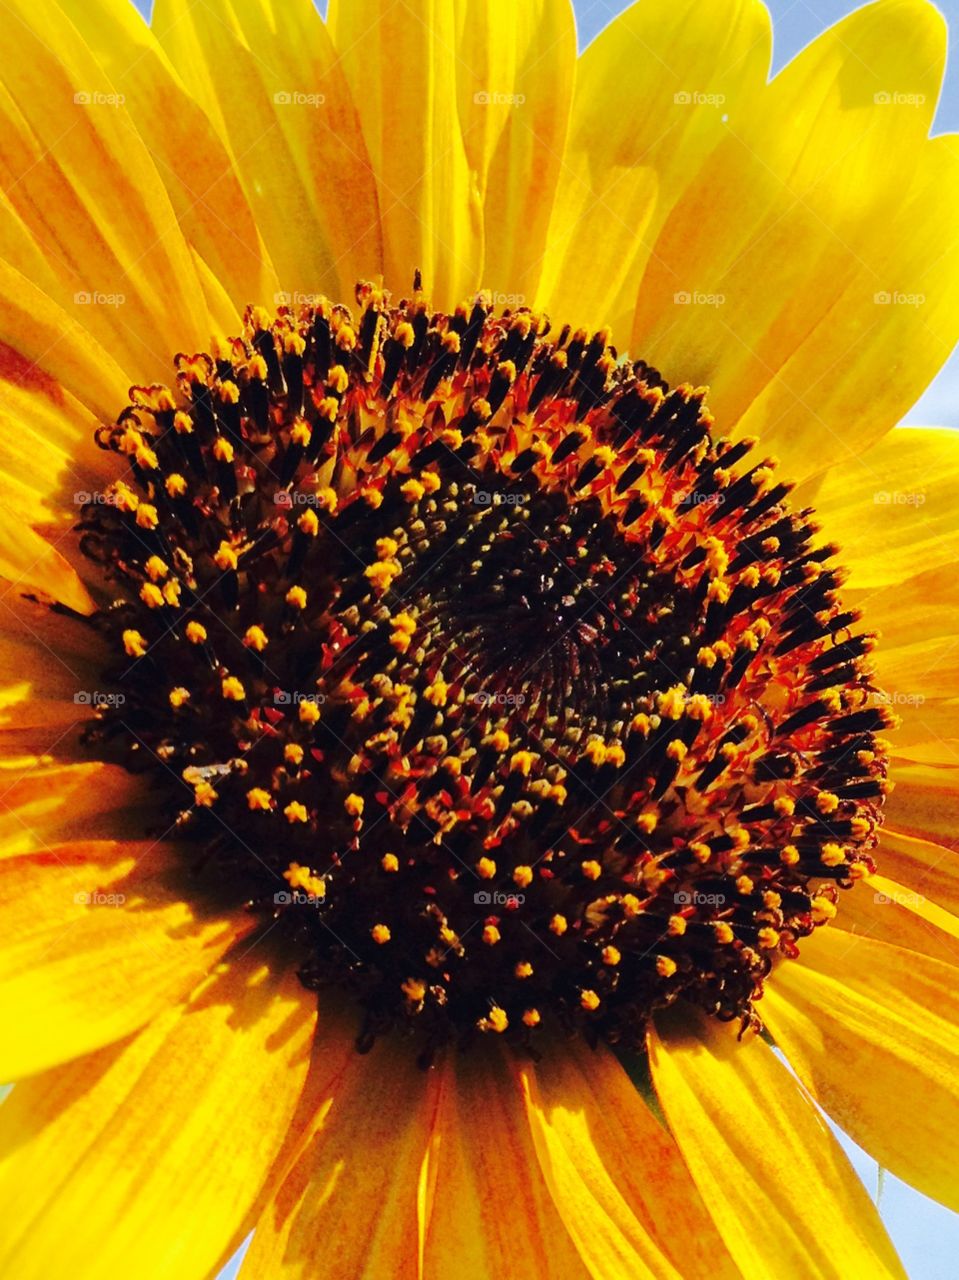 Macro of Sunflower Center Area. Had a good pic I could do this too using my IPhone 5C.  Most of my pics are with my IPhone anyway.